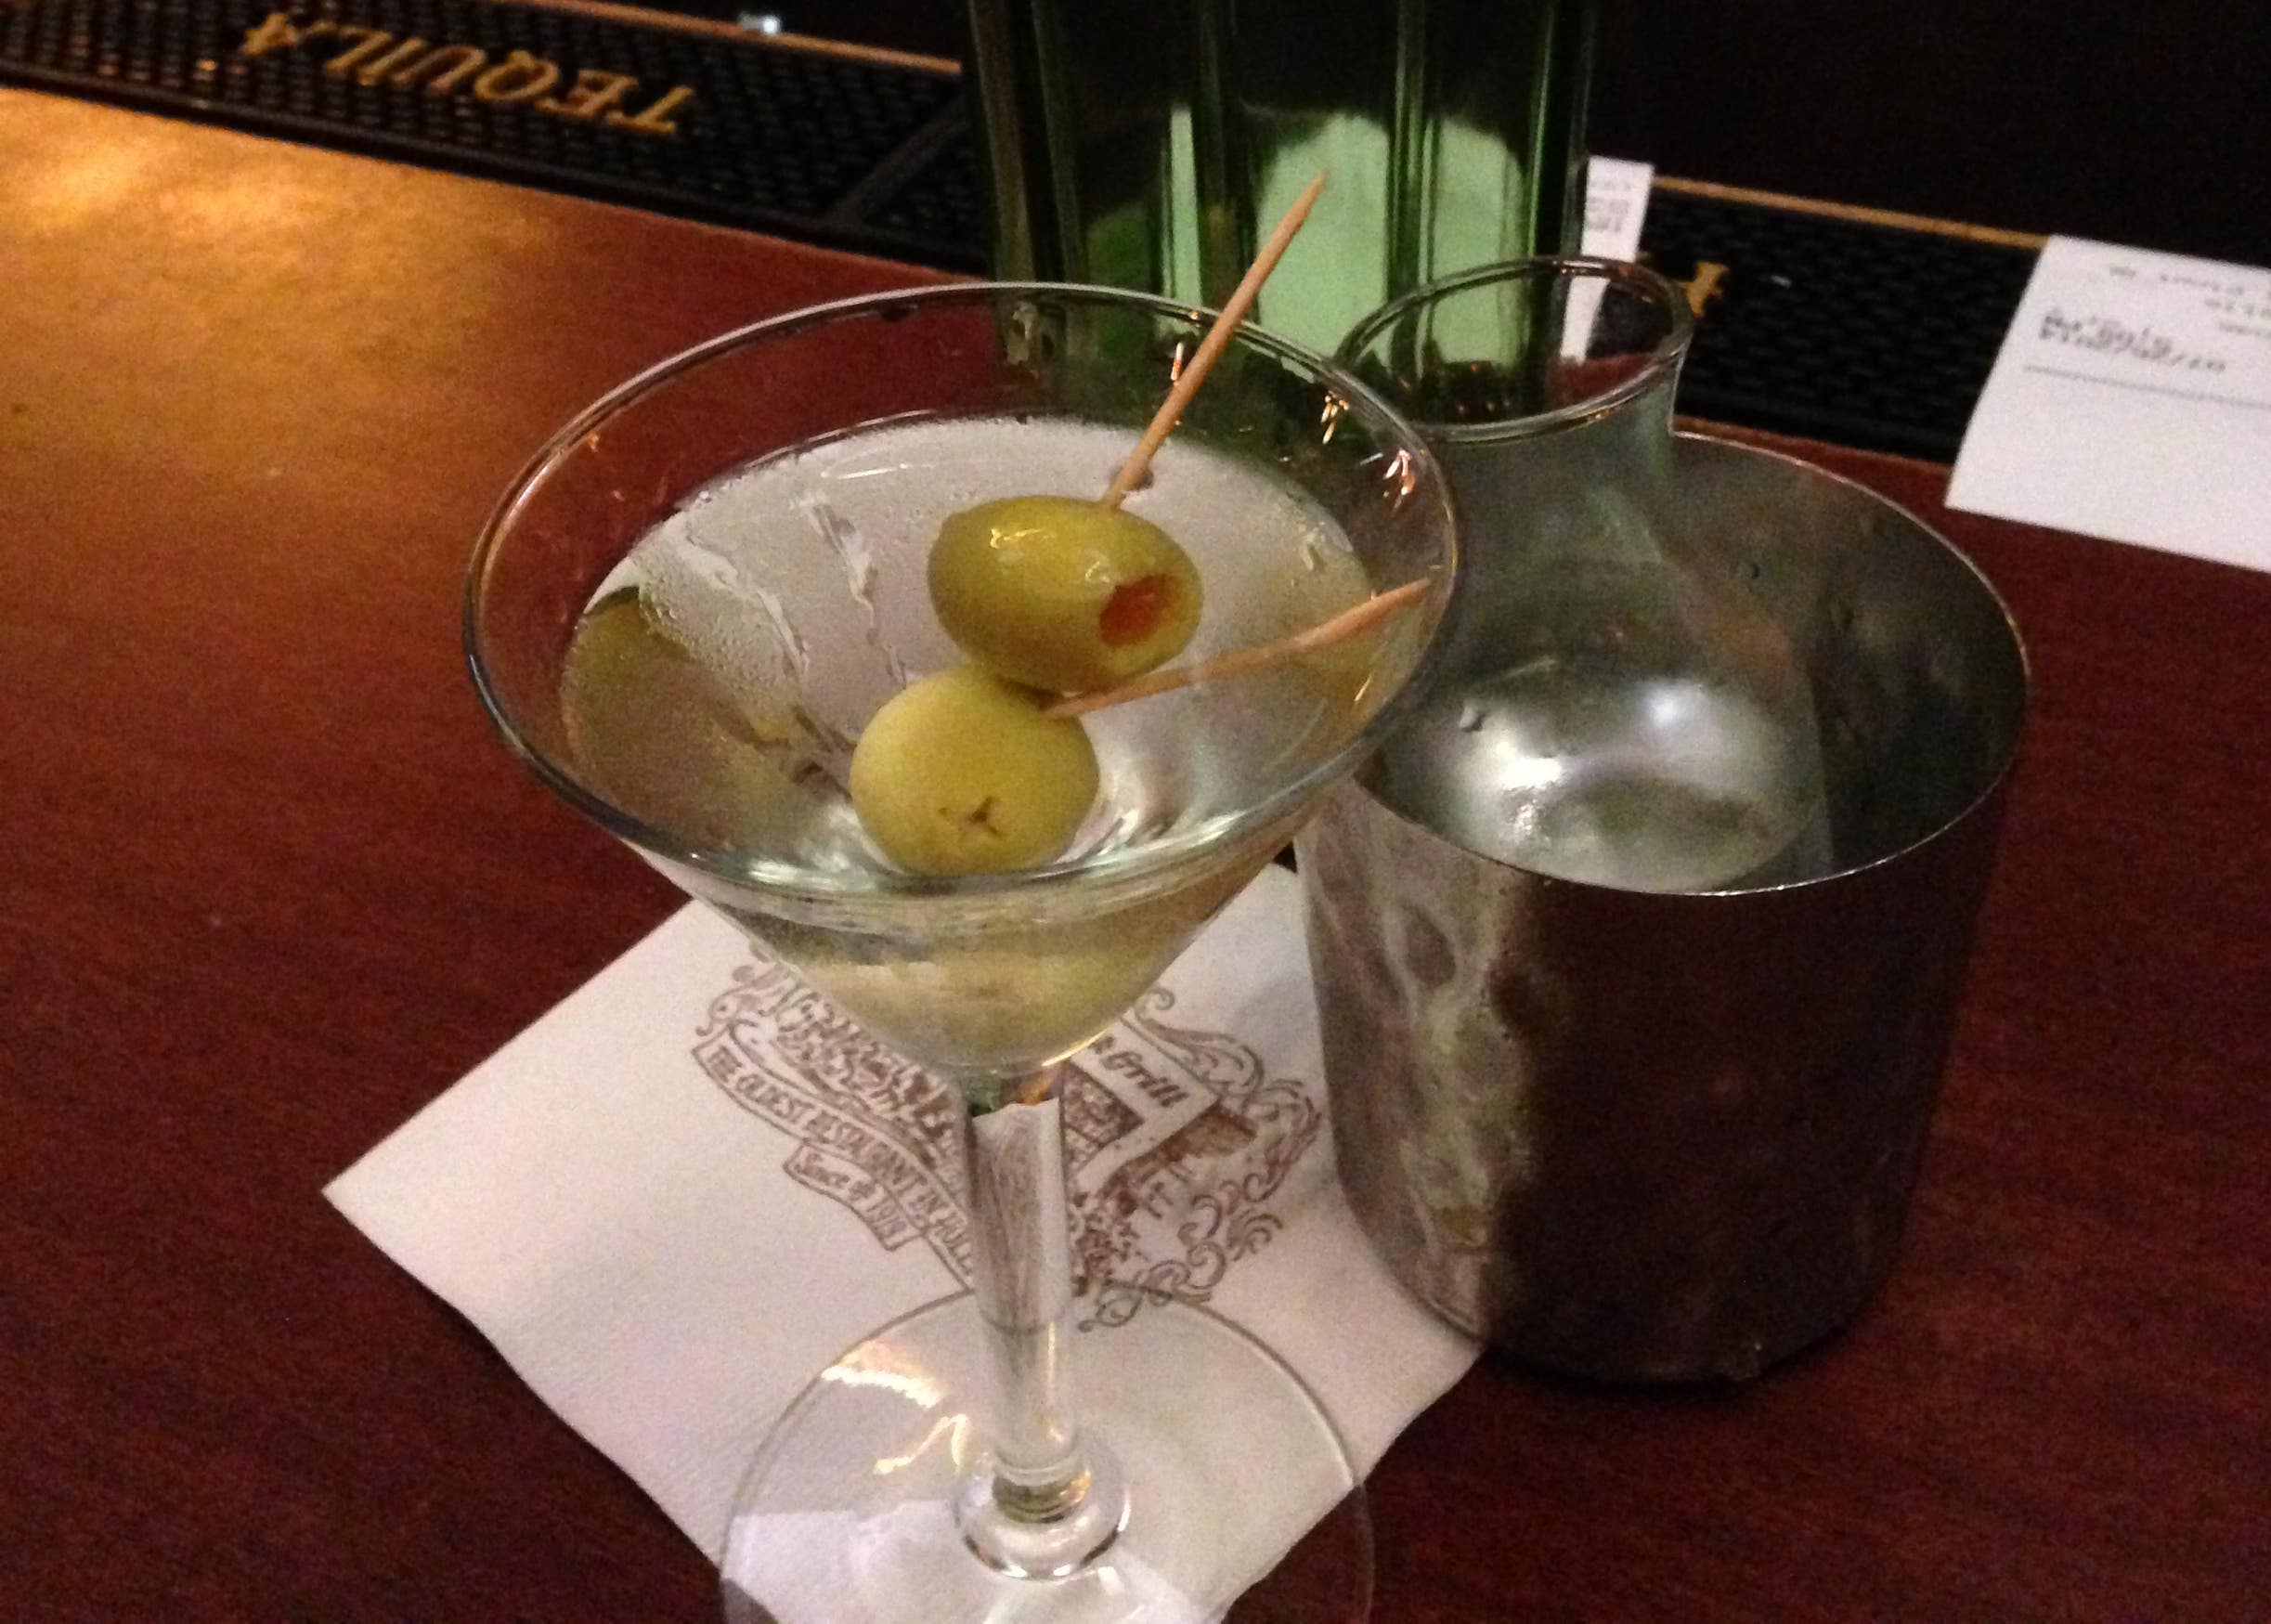 Classic Martini at Musso & Frank Grill